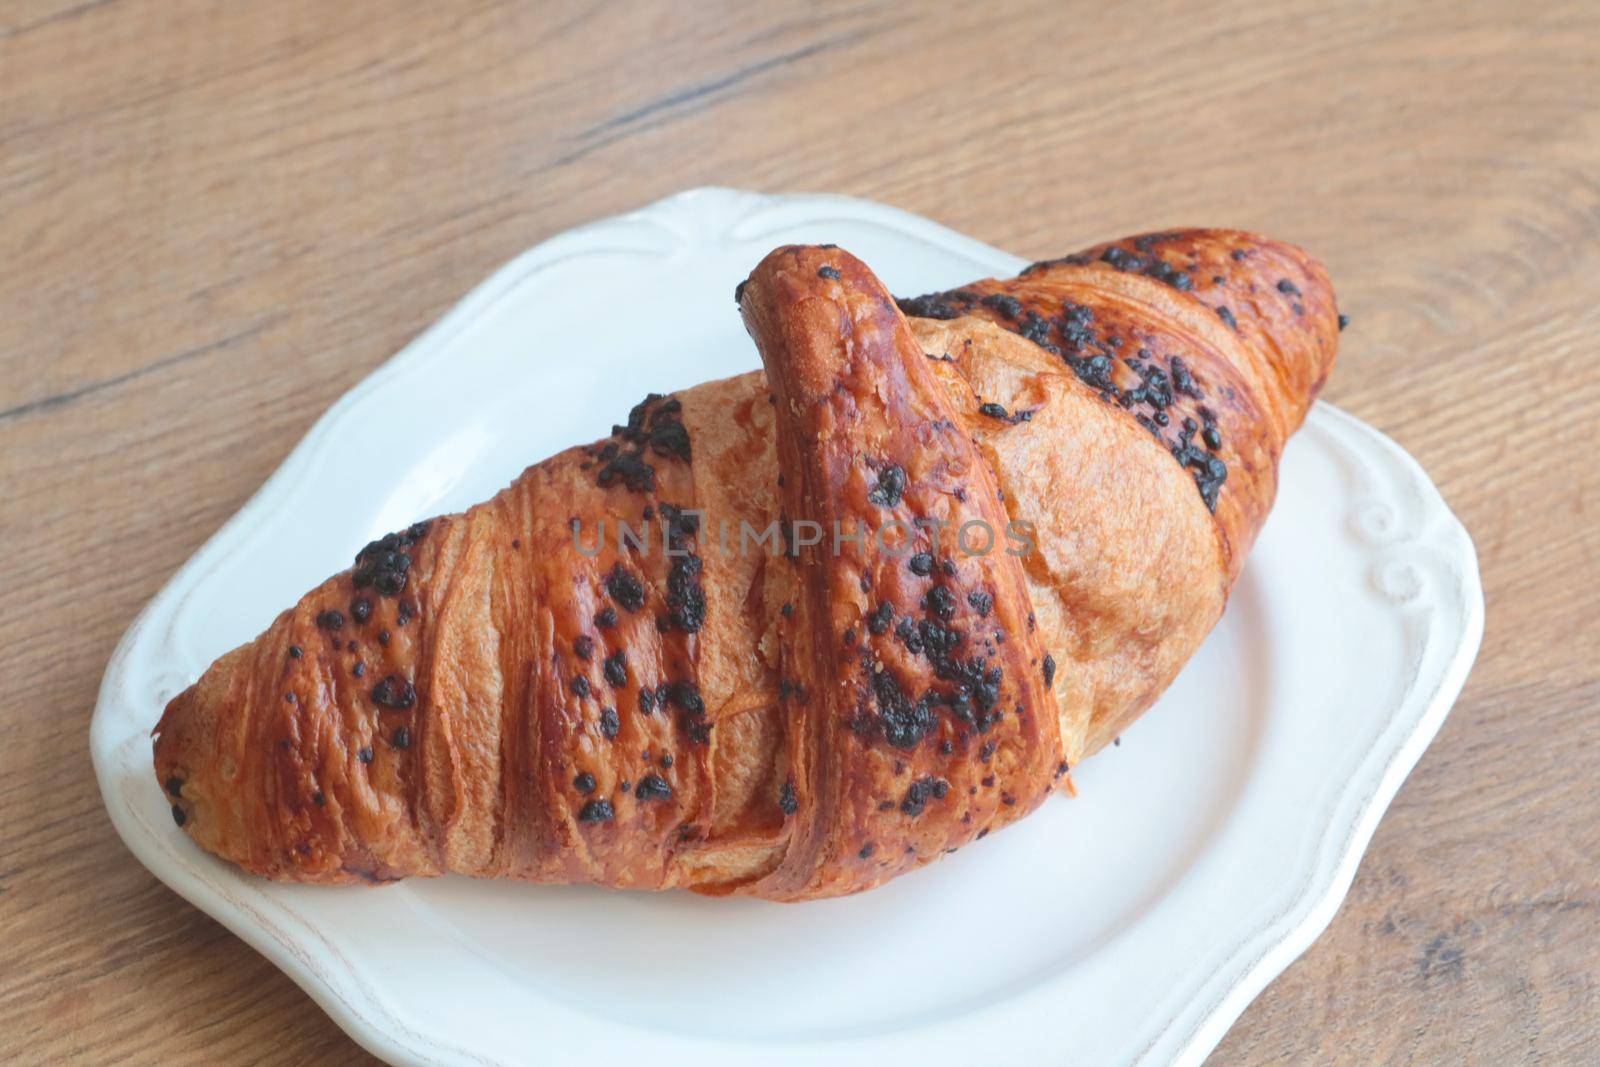 There is a delicious and fresh croissant on the plate. Fresh bakery. Sweets for tea or coffee. Bakery with fresh pastries. Food concept. by kip02kas